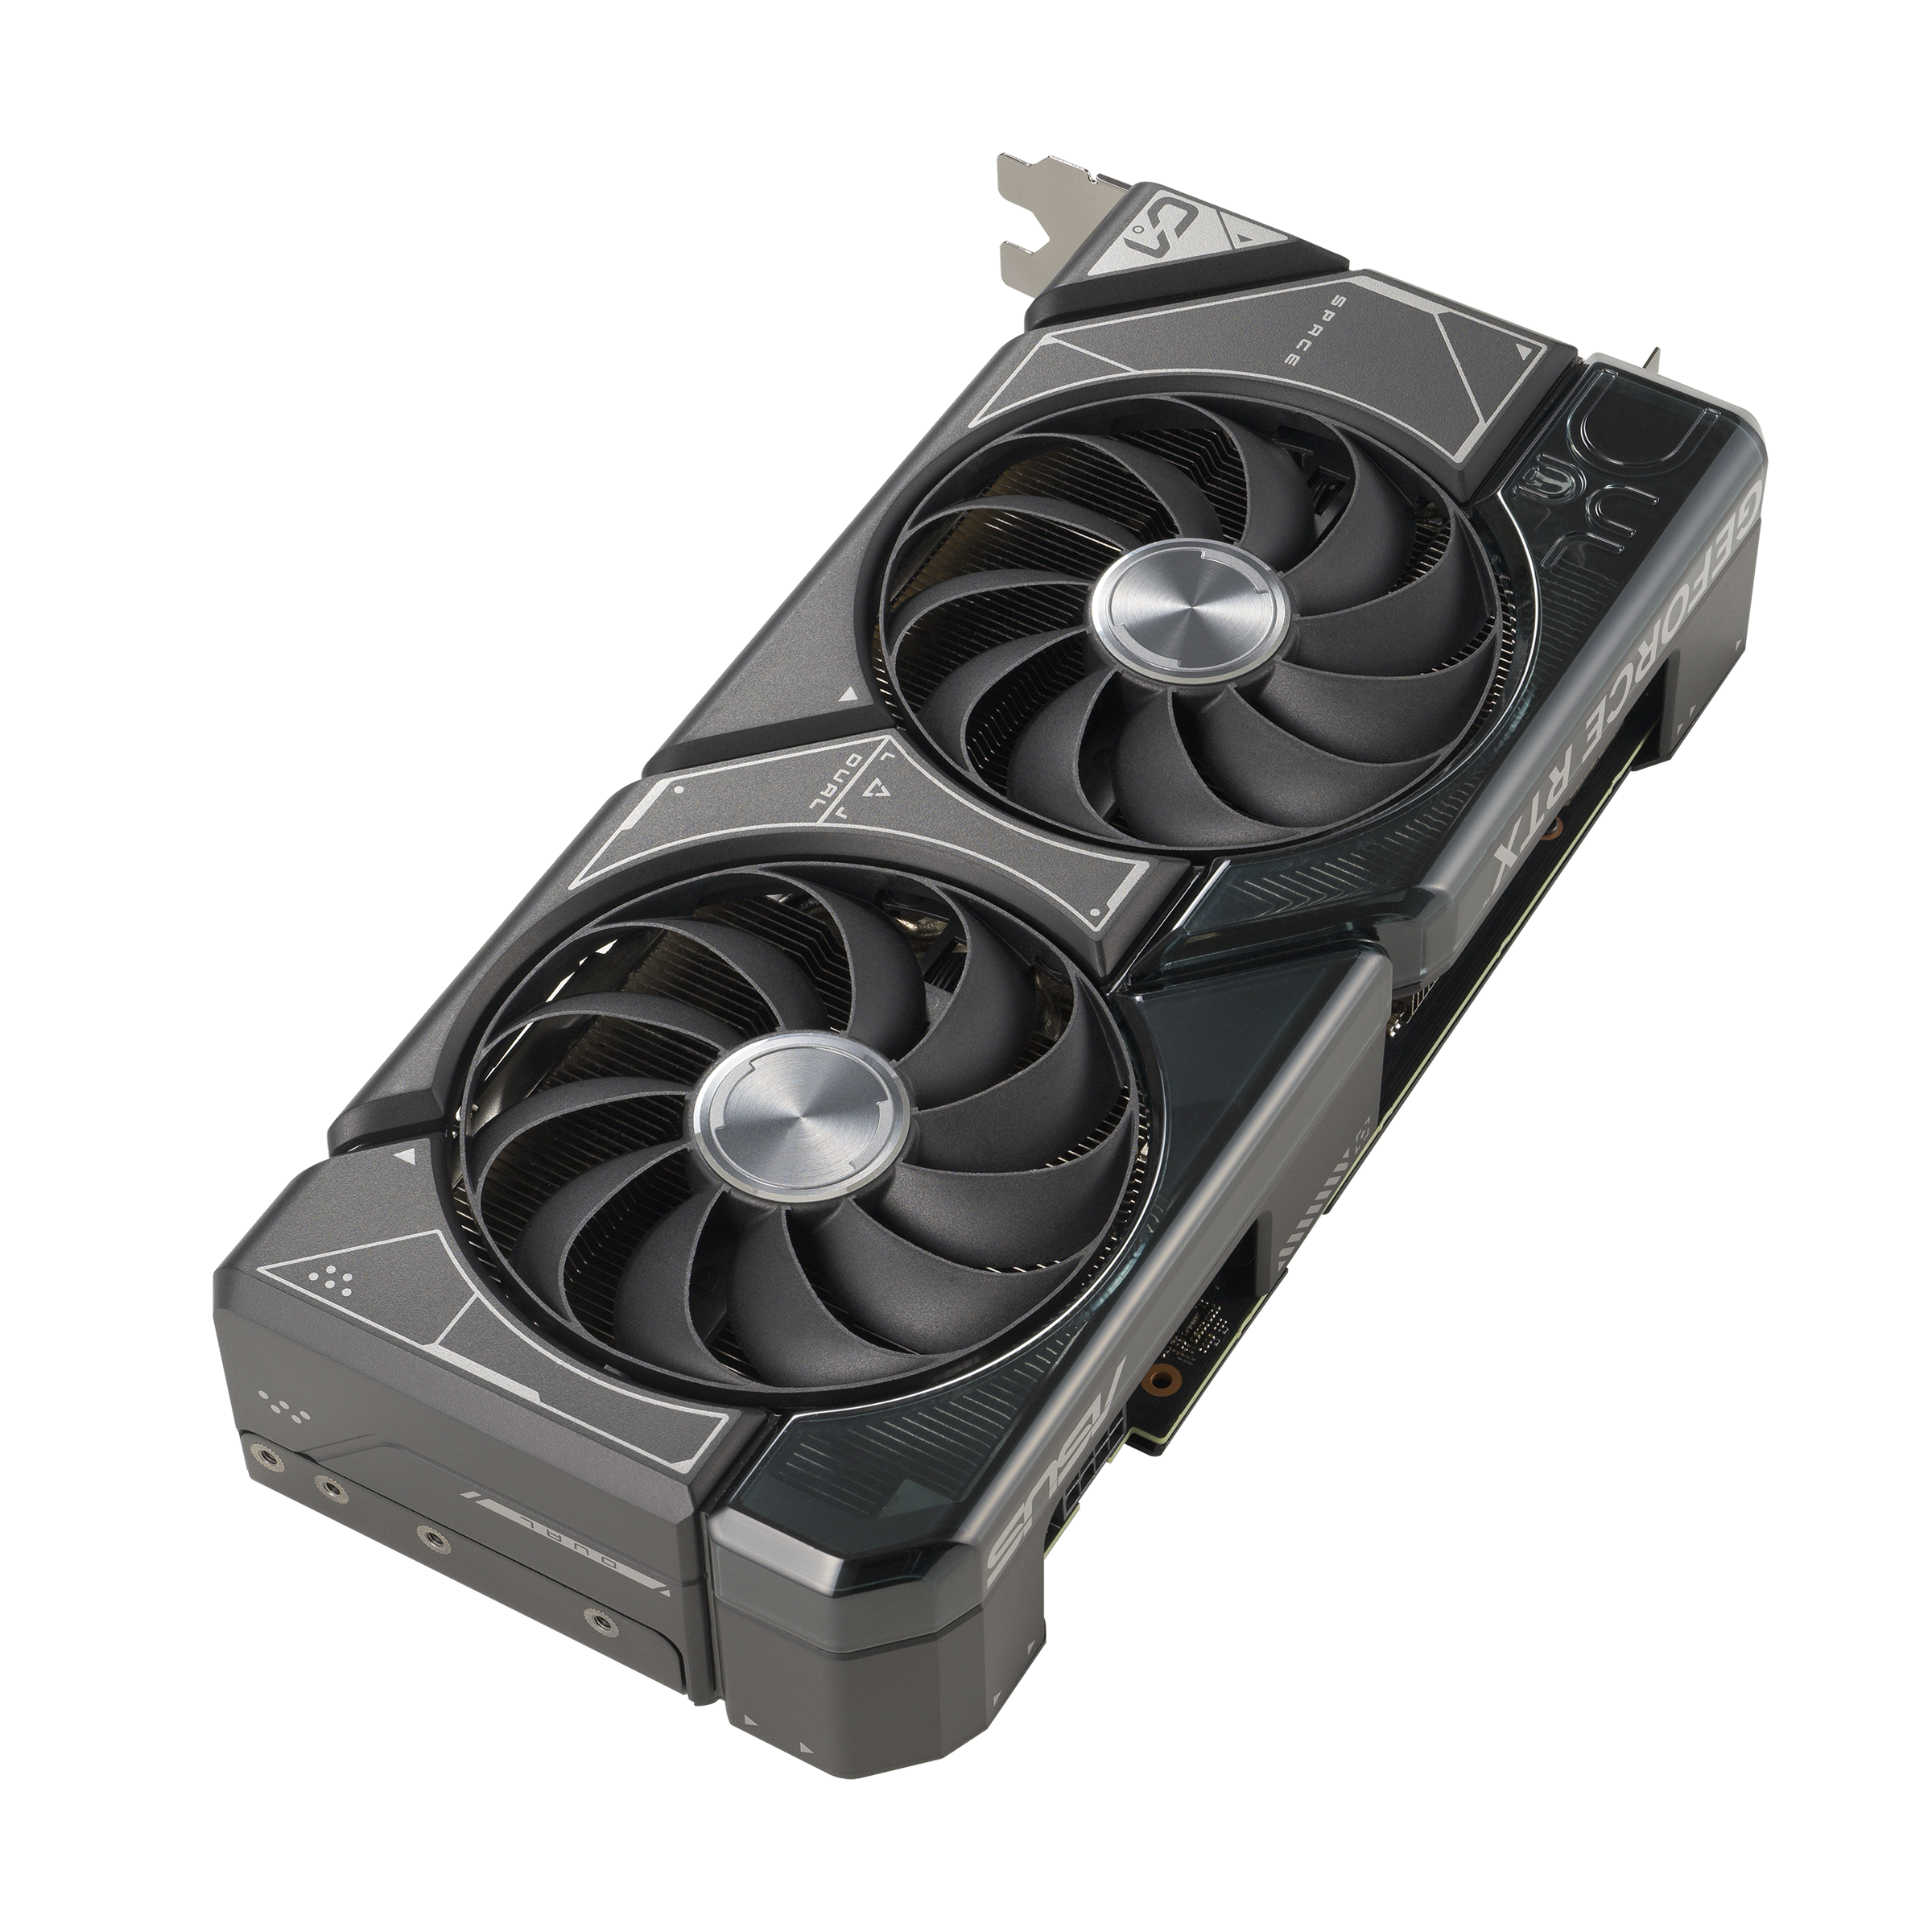 ASUS DUAL GeForce RTX 4070 OC Edition – Carte graphique gaming